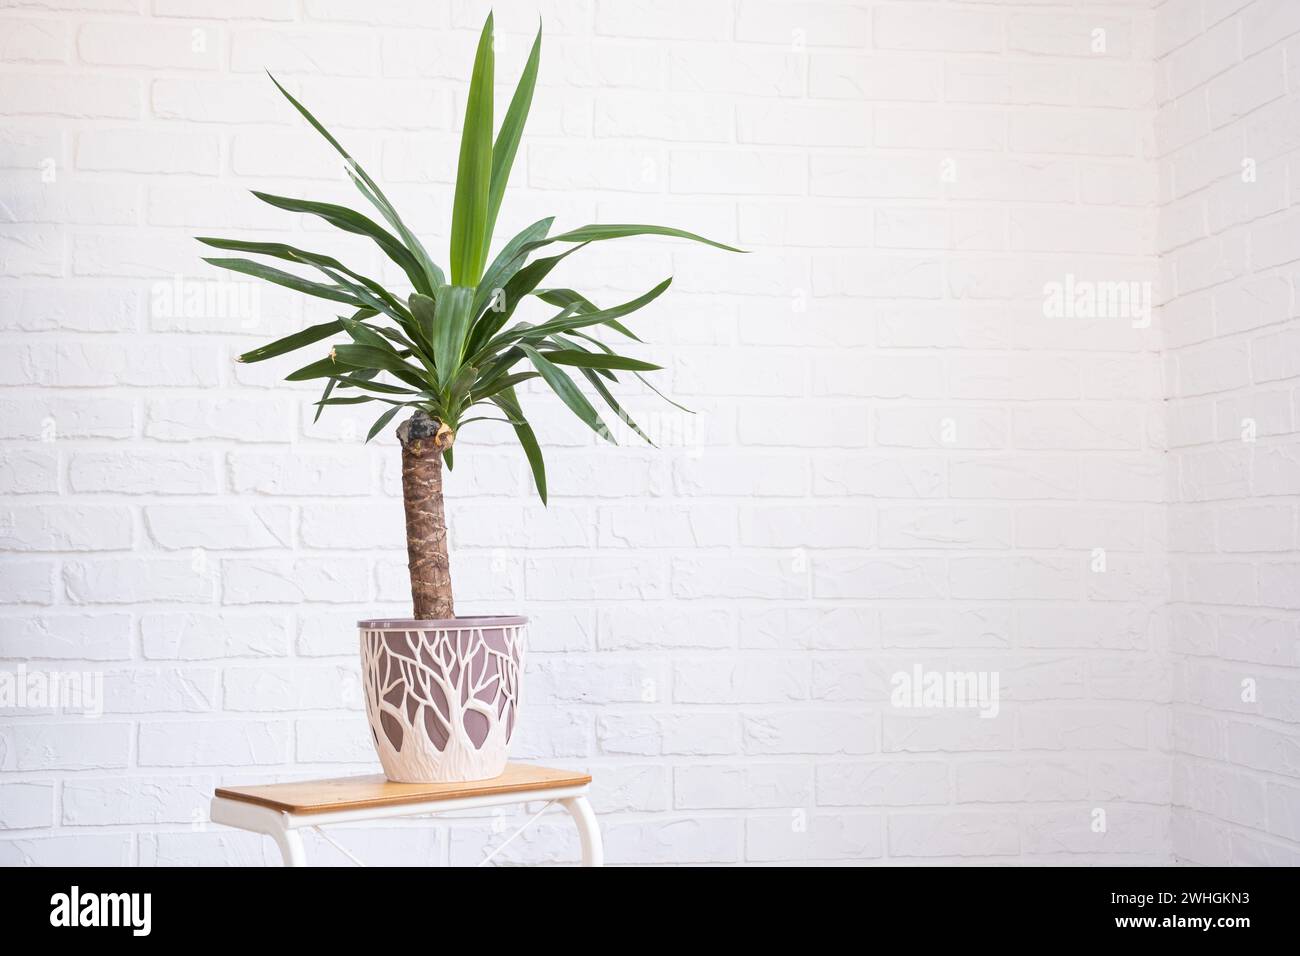 Dracaena palm yucca in interior on whtite brick wall. Potted house plants, green home decor, care and cultivation Stock Photo